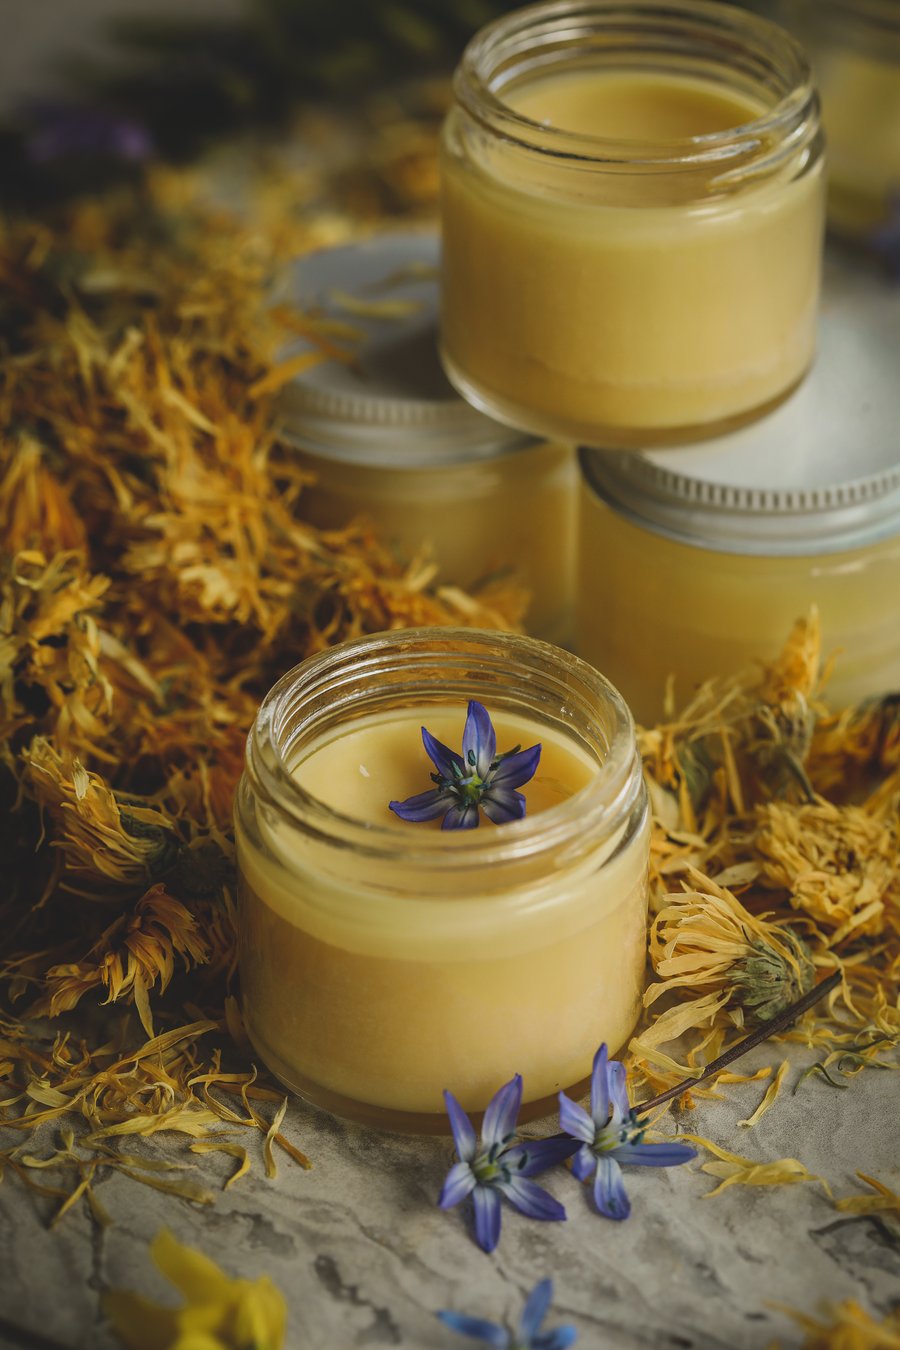 Homemade belly butter in jars amidst calendula flowers.